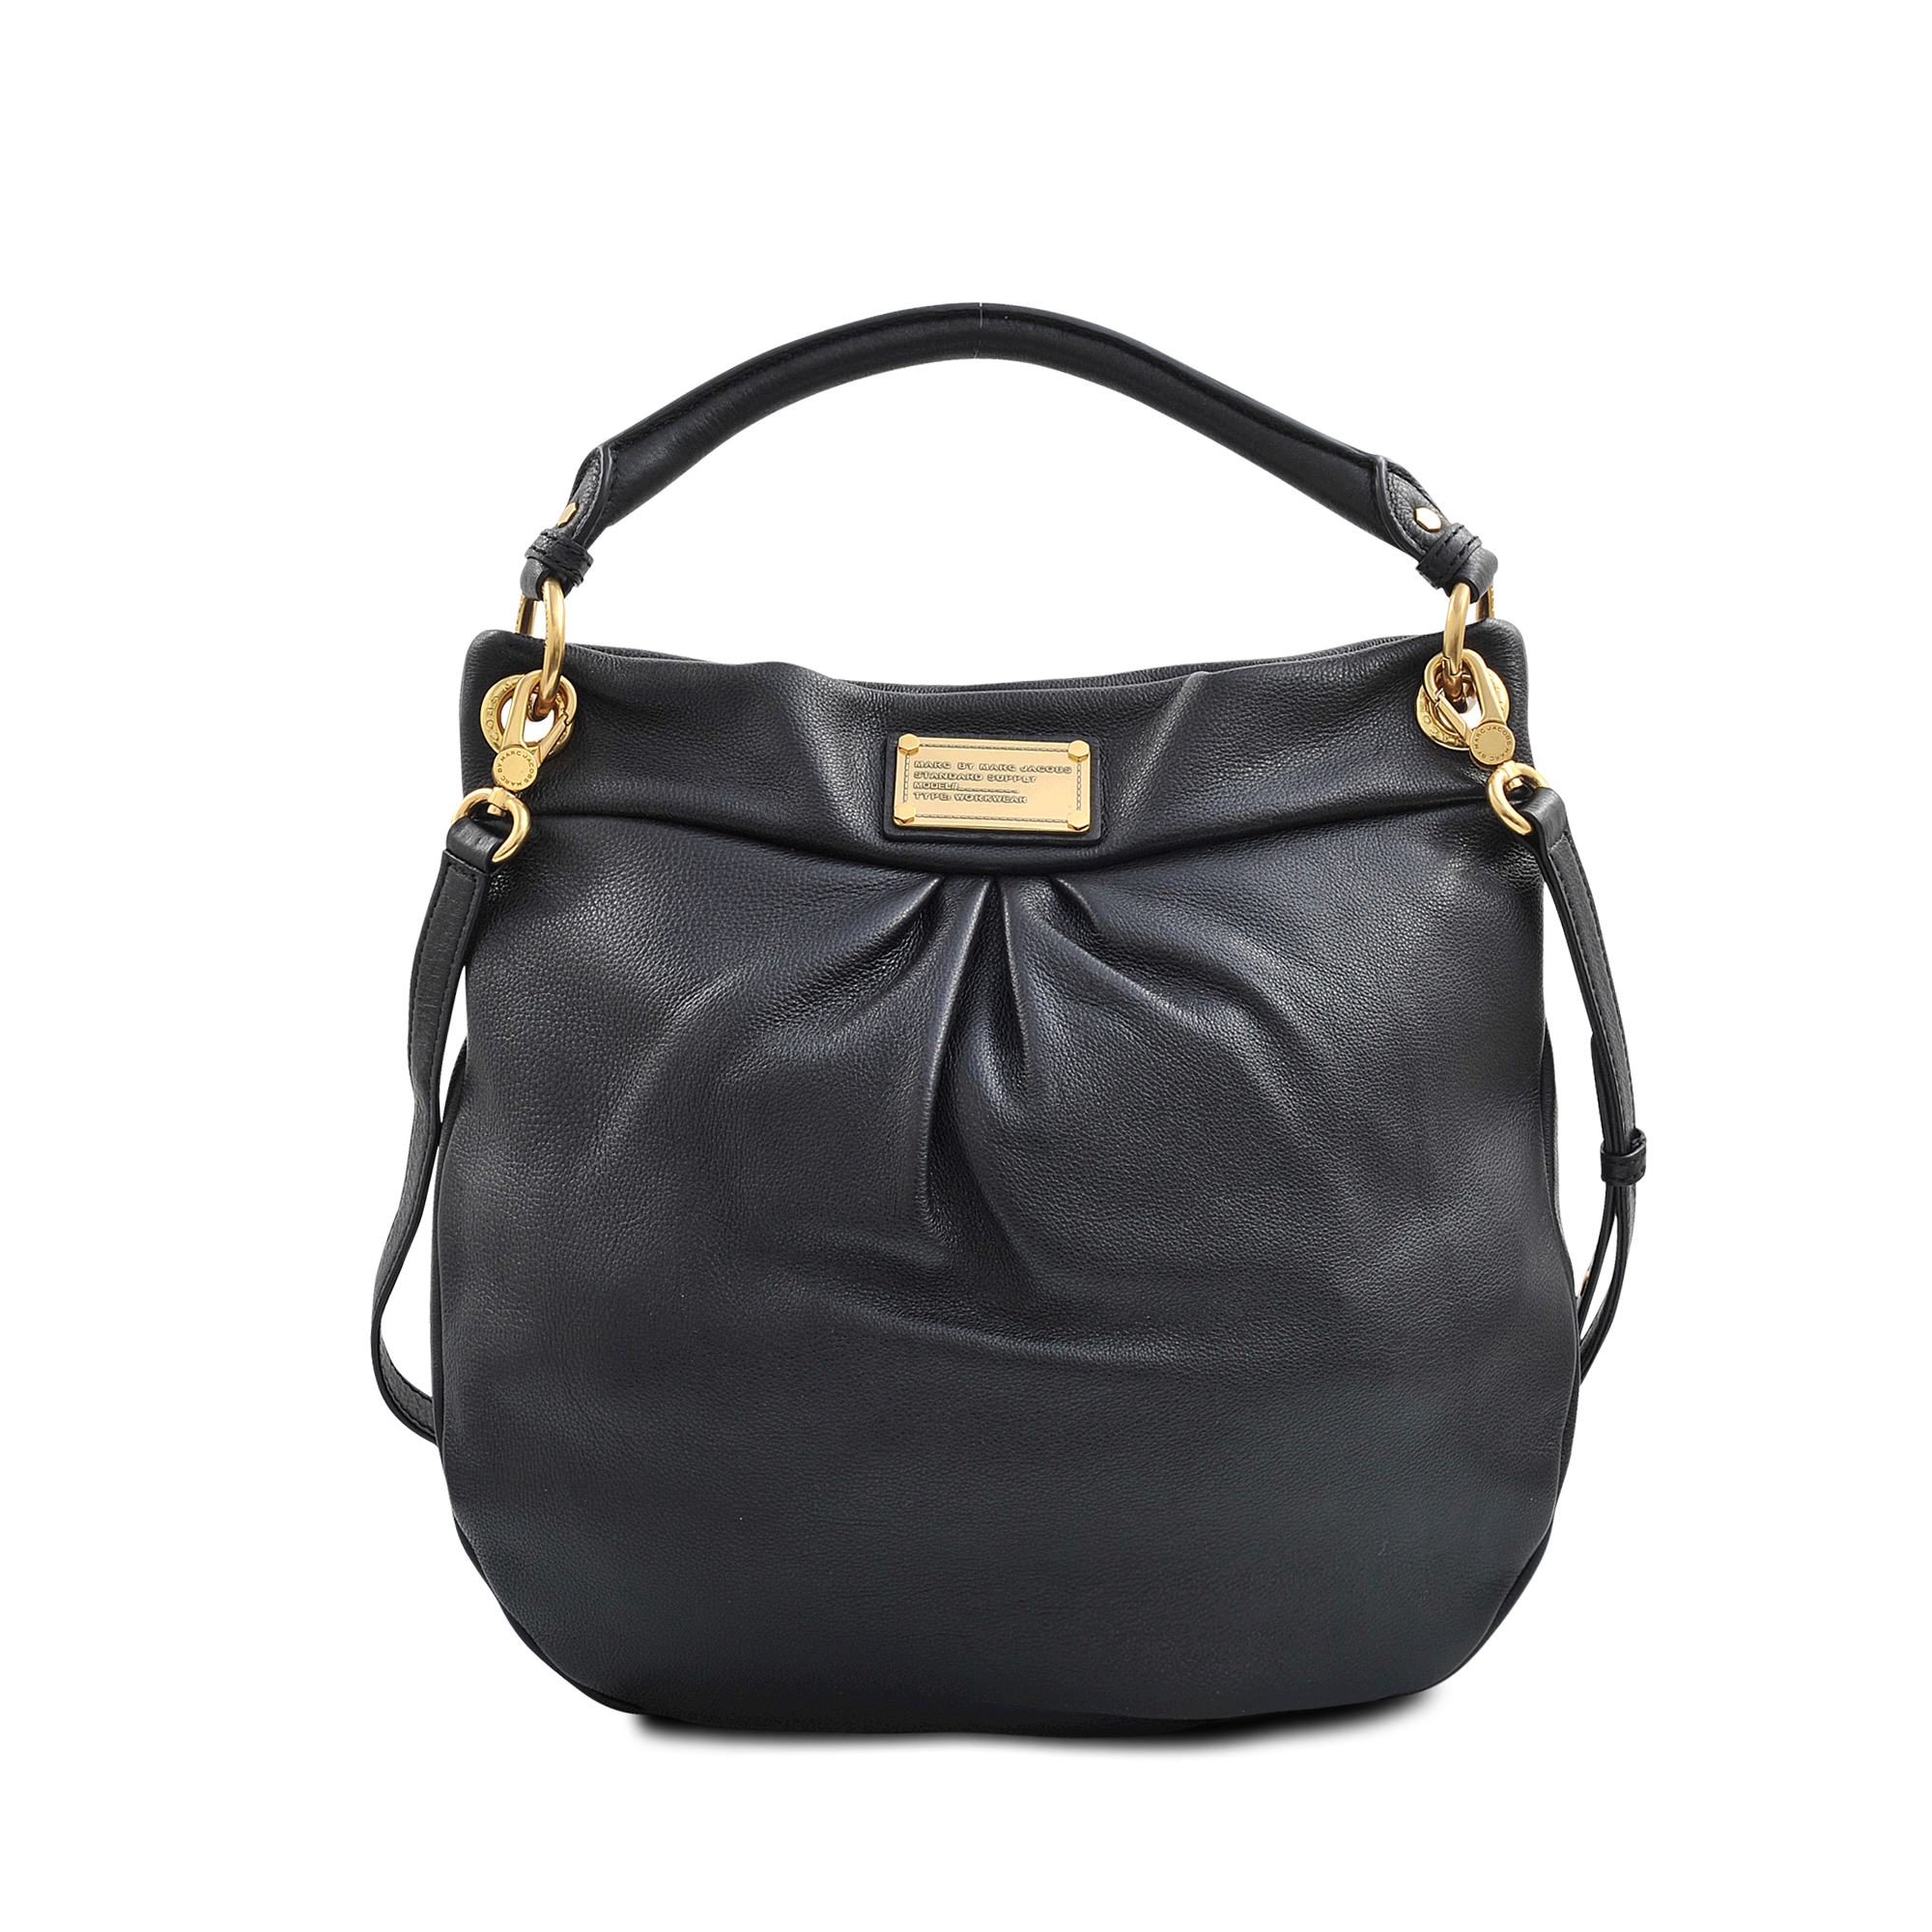 Lyst - Marc By Marc Jacobs Hillier Hobo Bag in Black